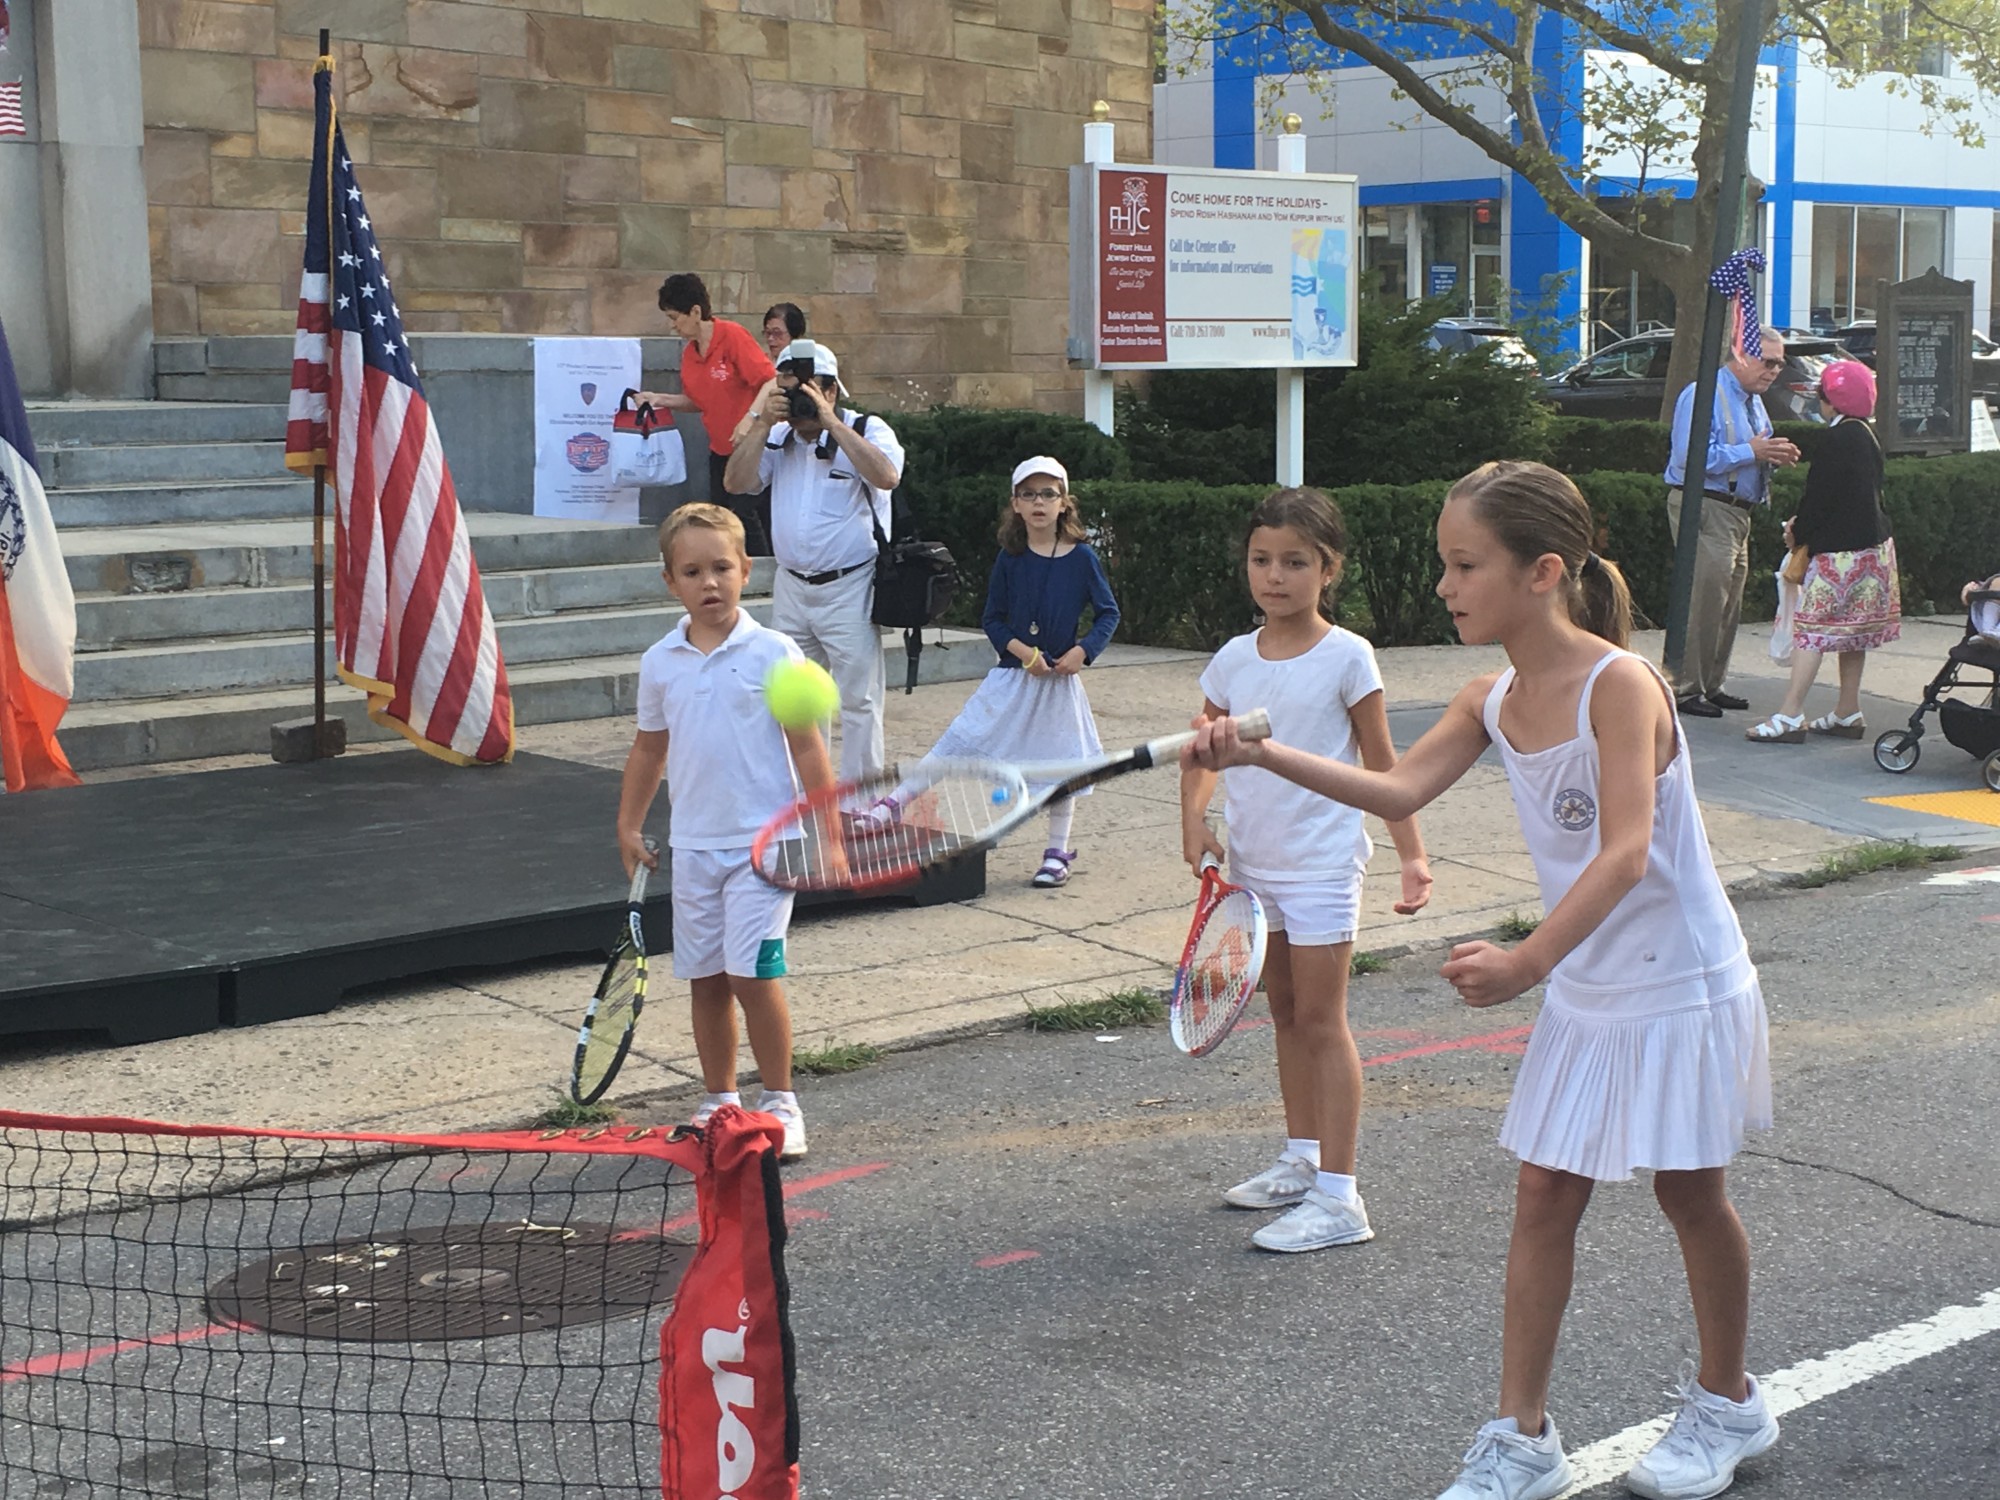 Tennis demonstrations from the West Side Tennis Club